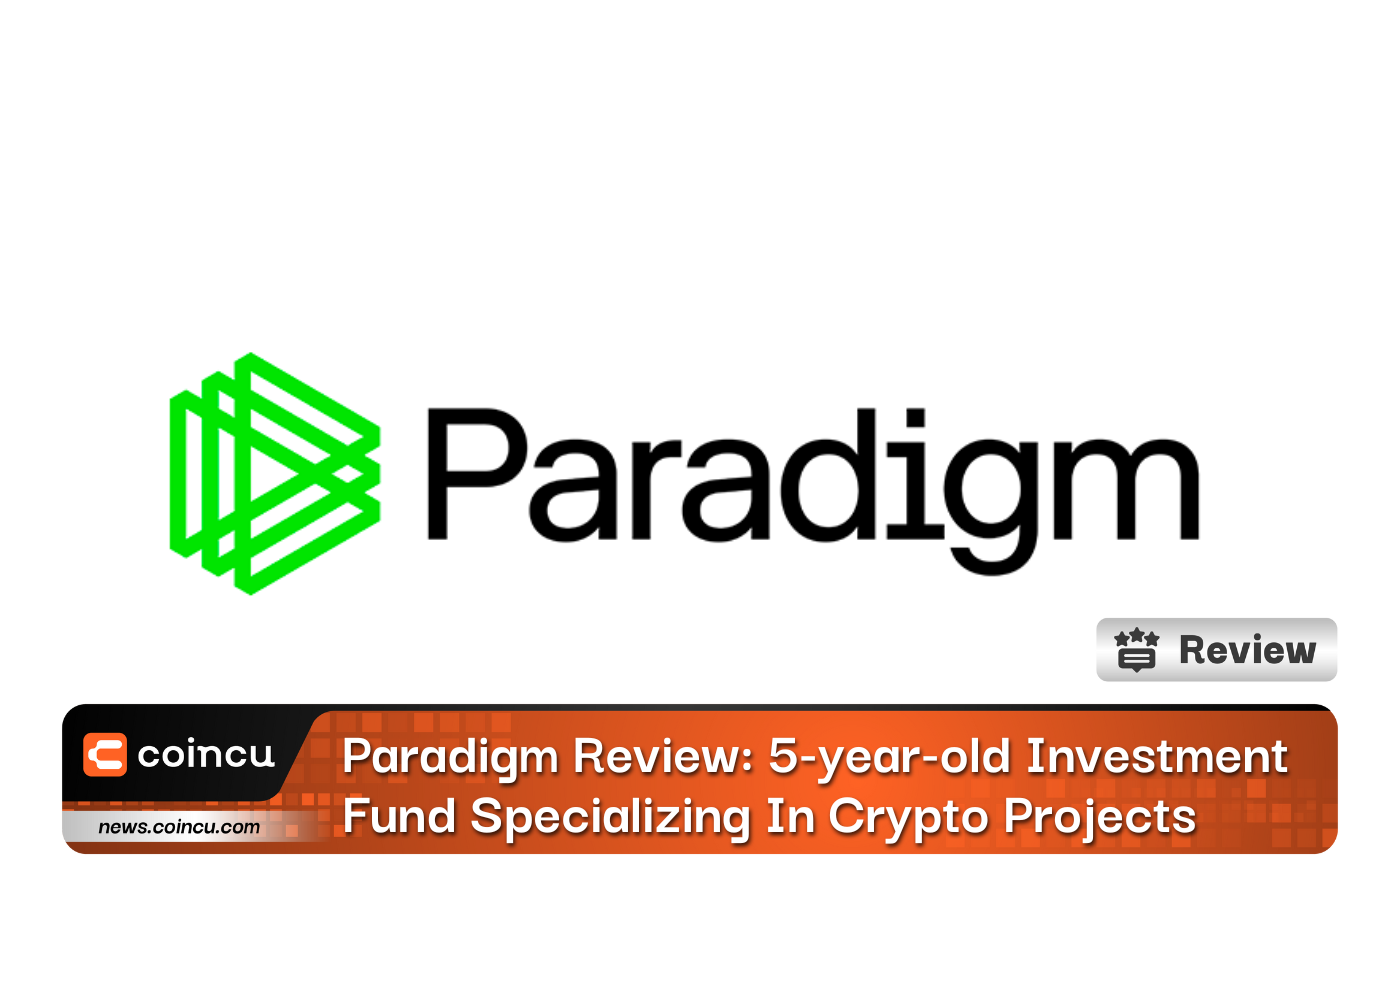 Paradigm Review: 5-year-old Investment Fund Specializing In Crypto Projects